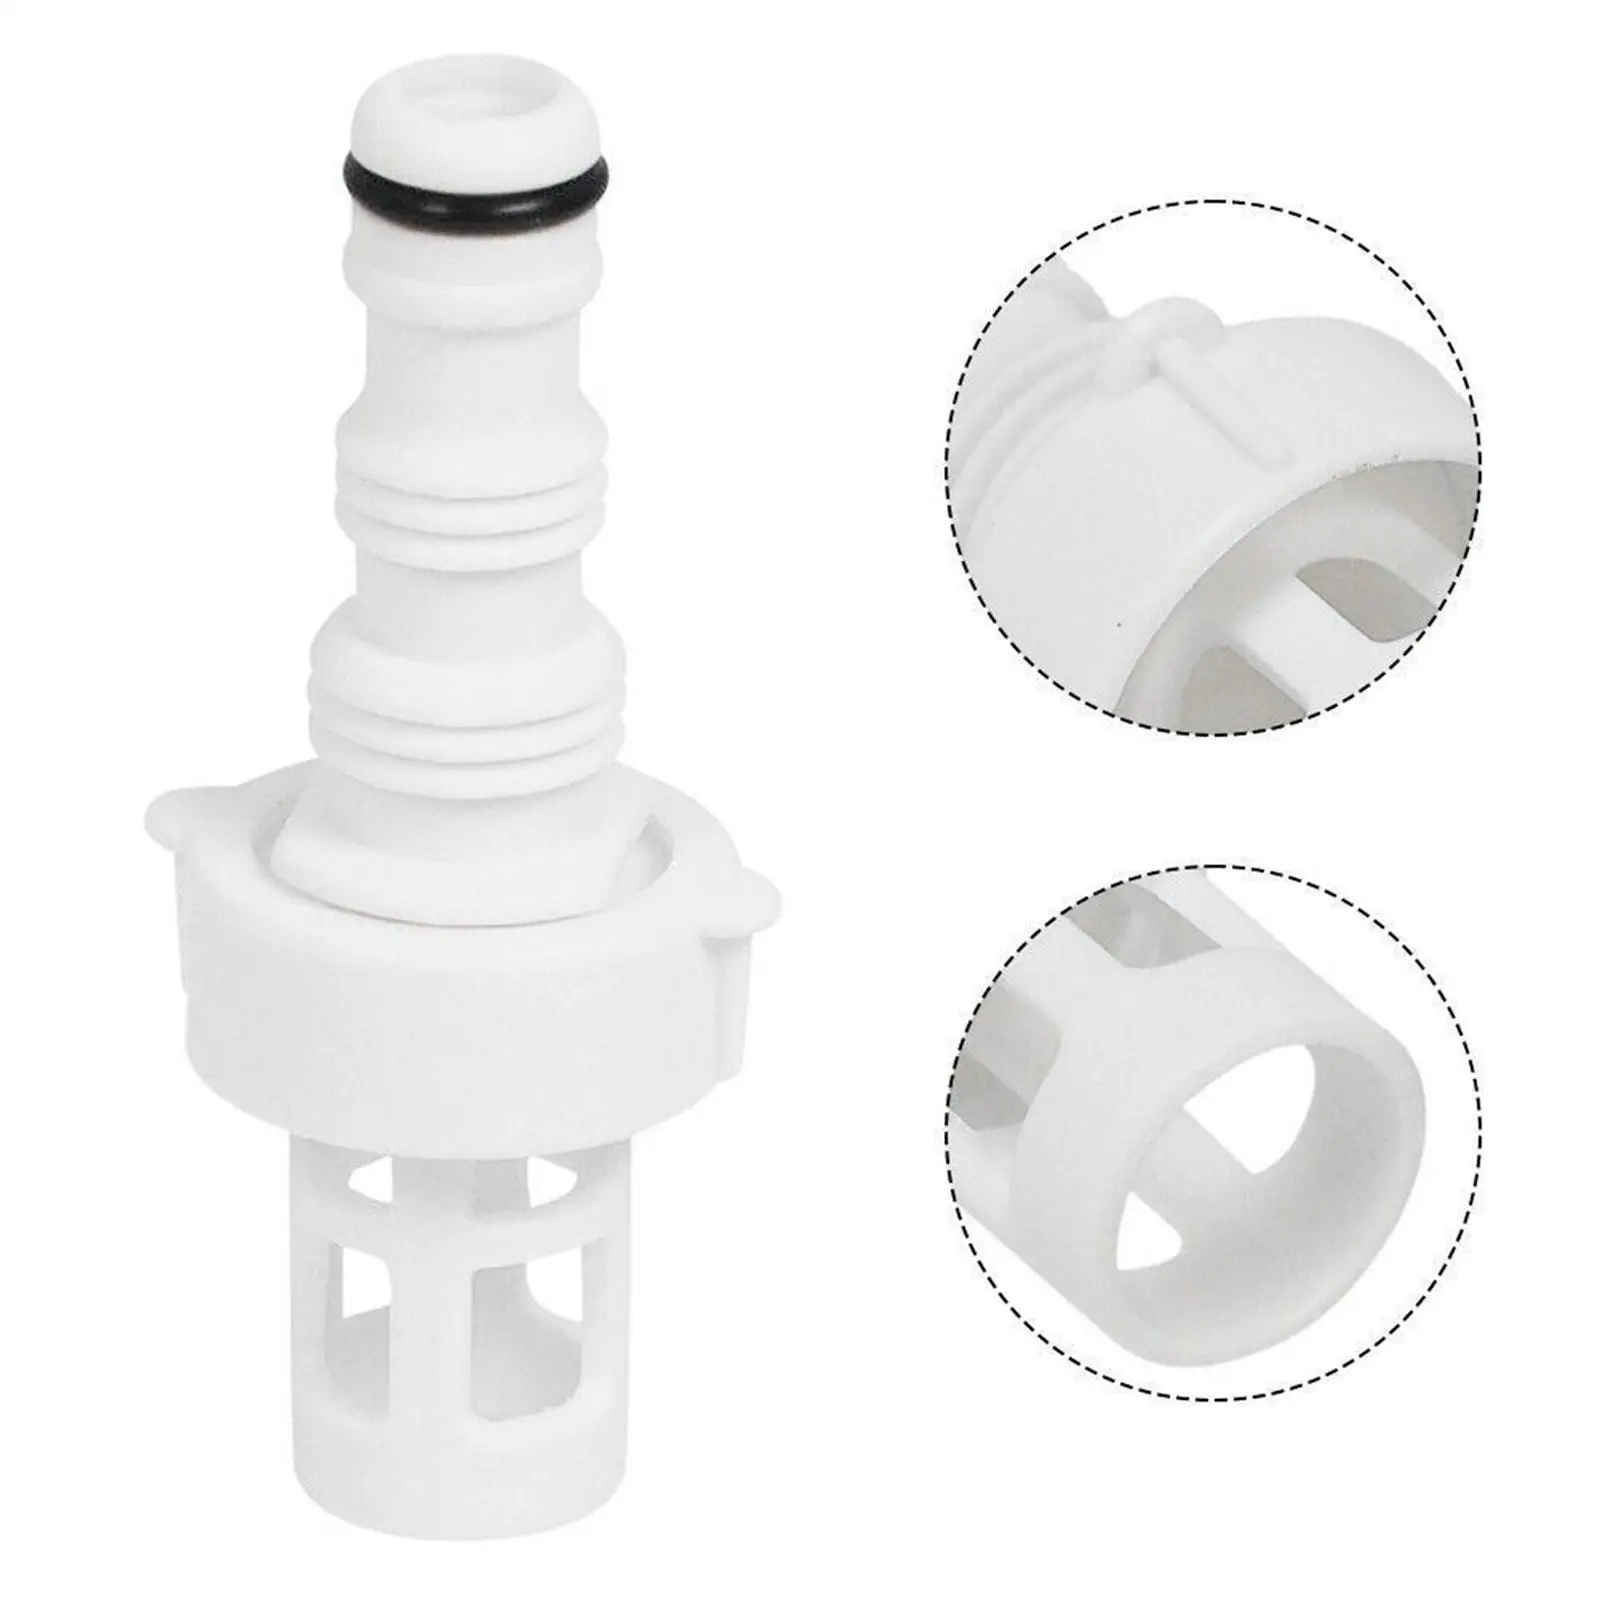 Hose Drain Plug Connector Sturdy Adapter Connection to Drainage Device